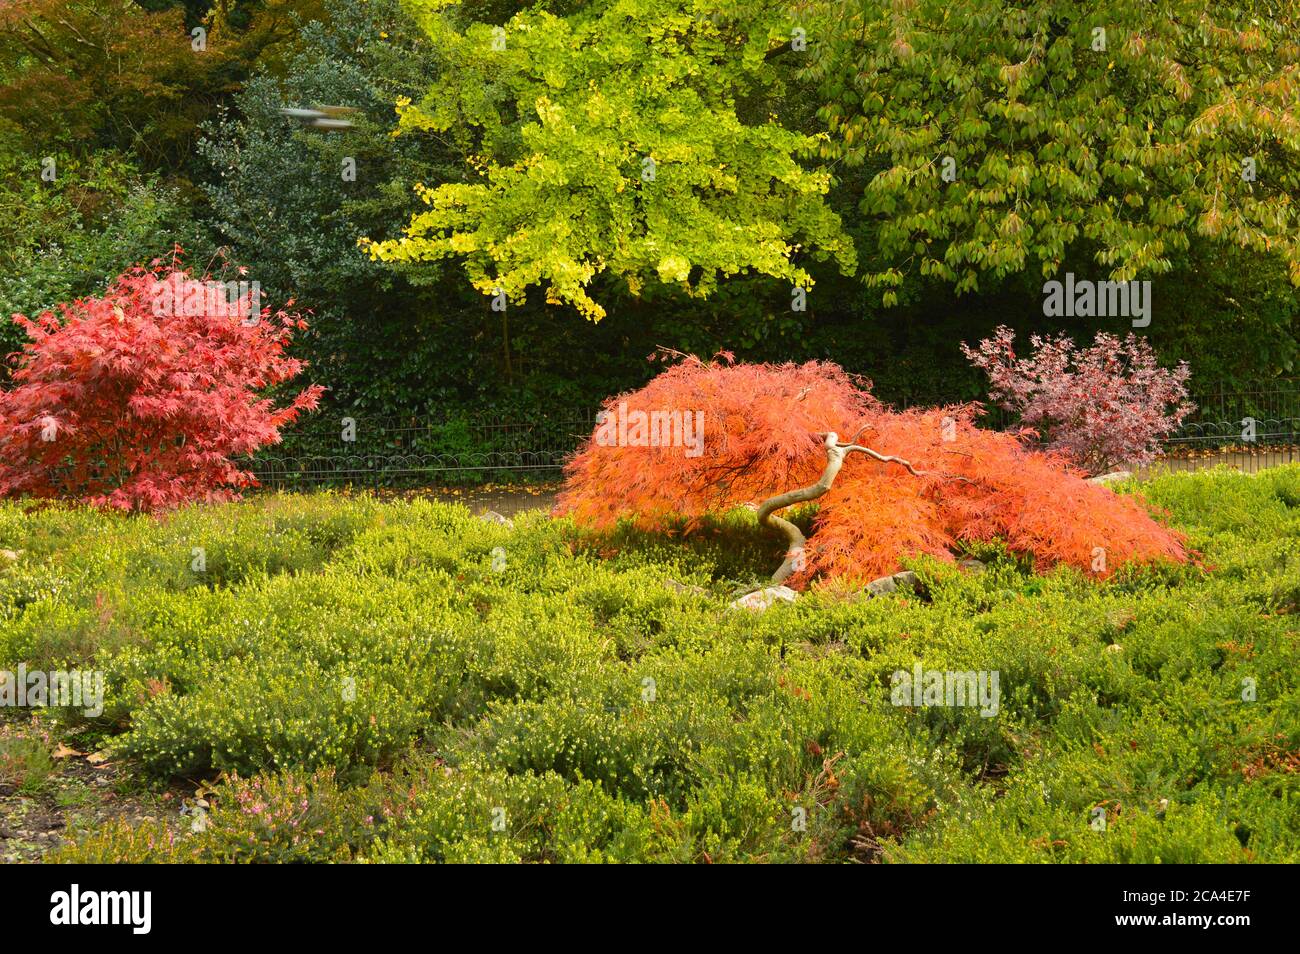 green and red miniature bonsai trees in a park Stock Photo